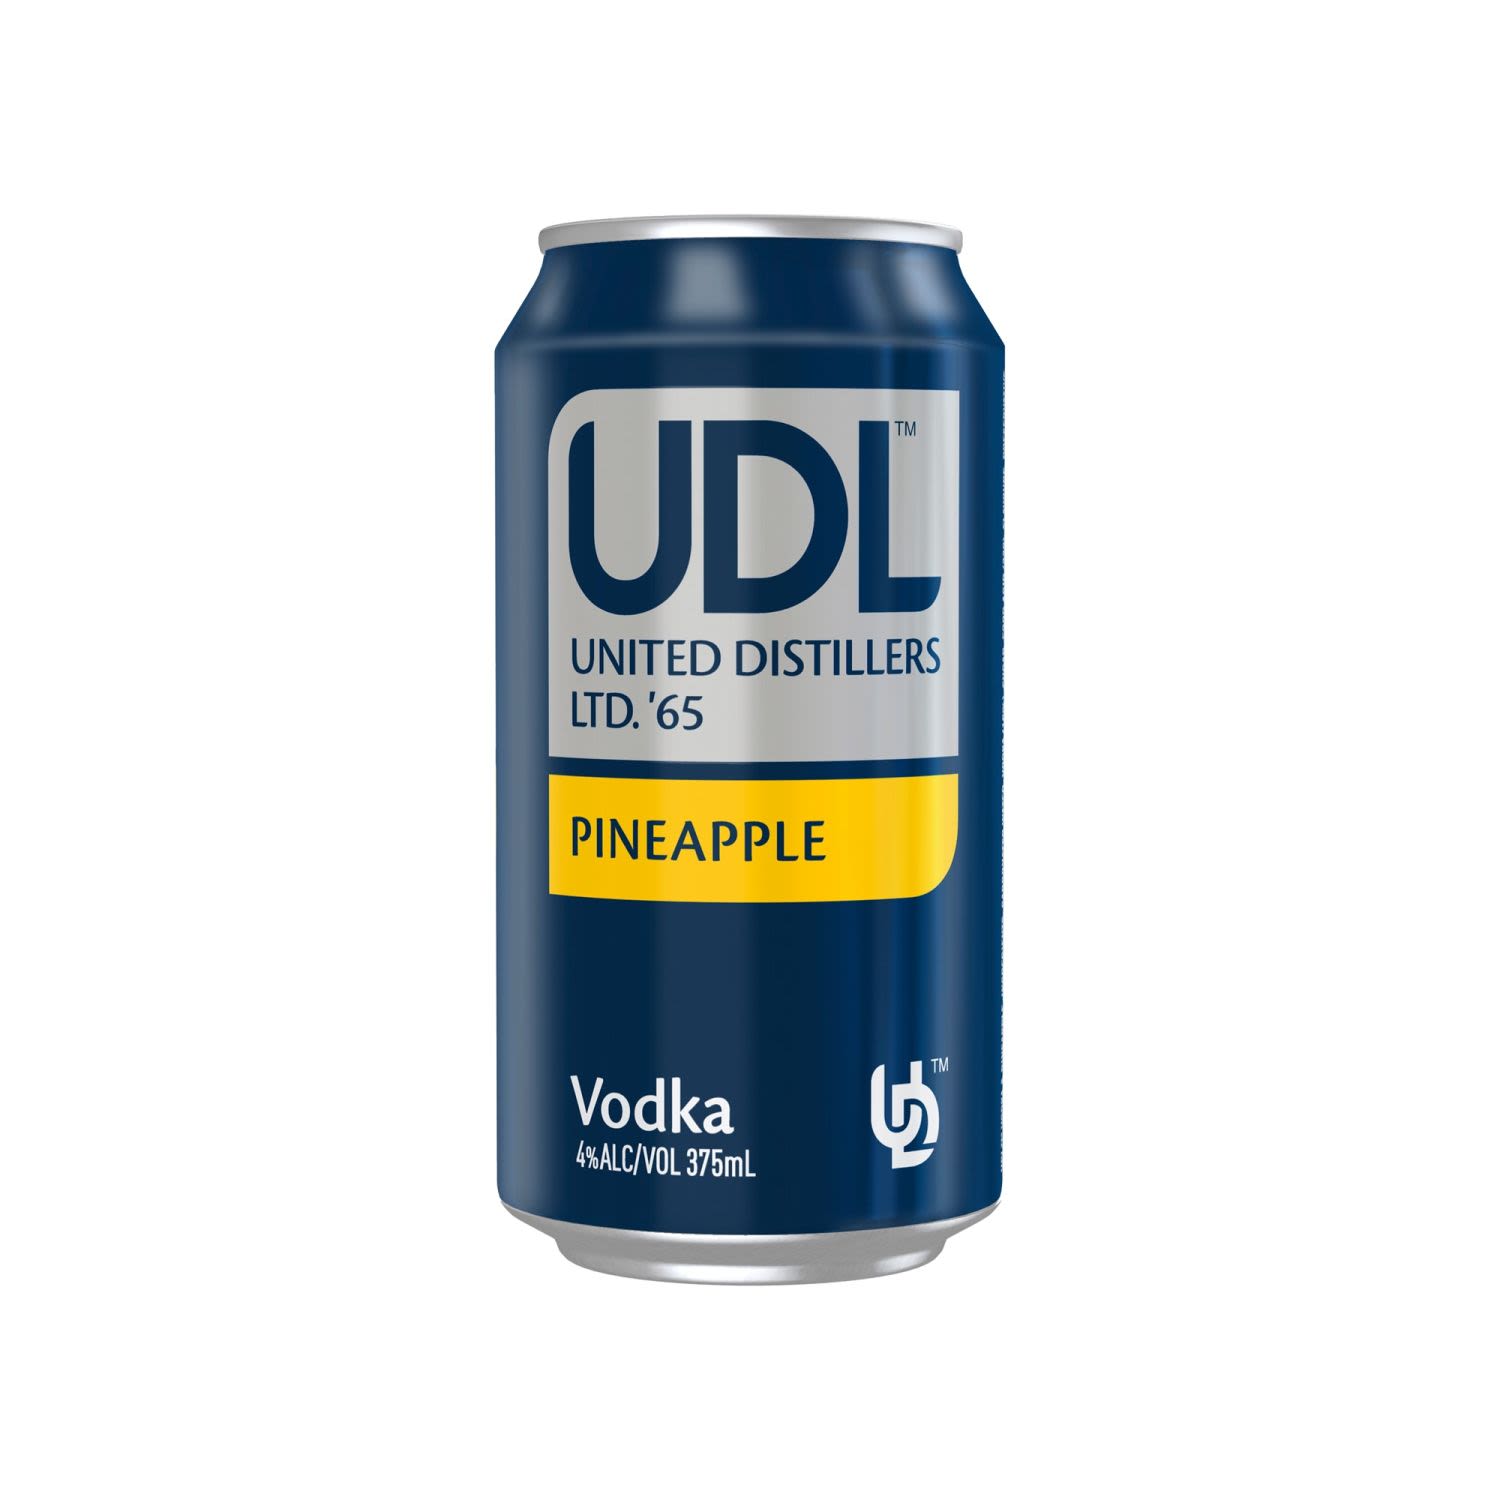 UDL Vodka & Pineapple Can 375mL